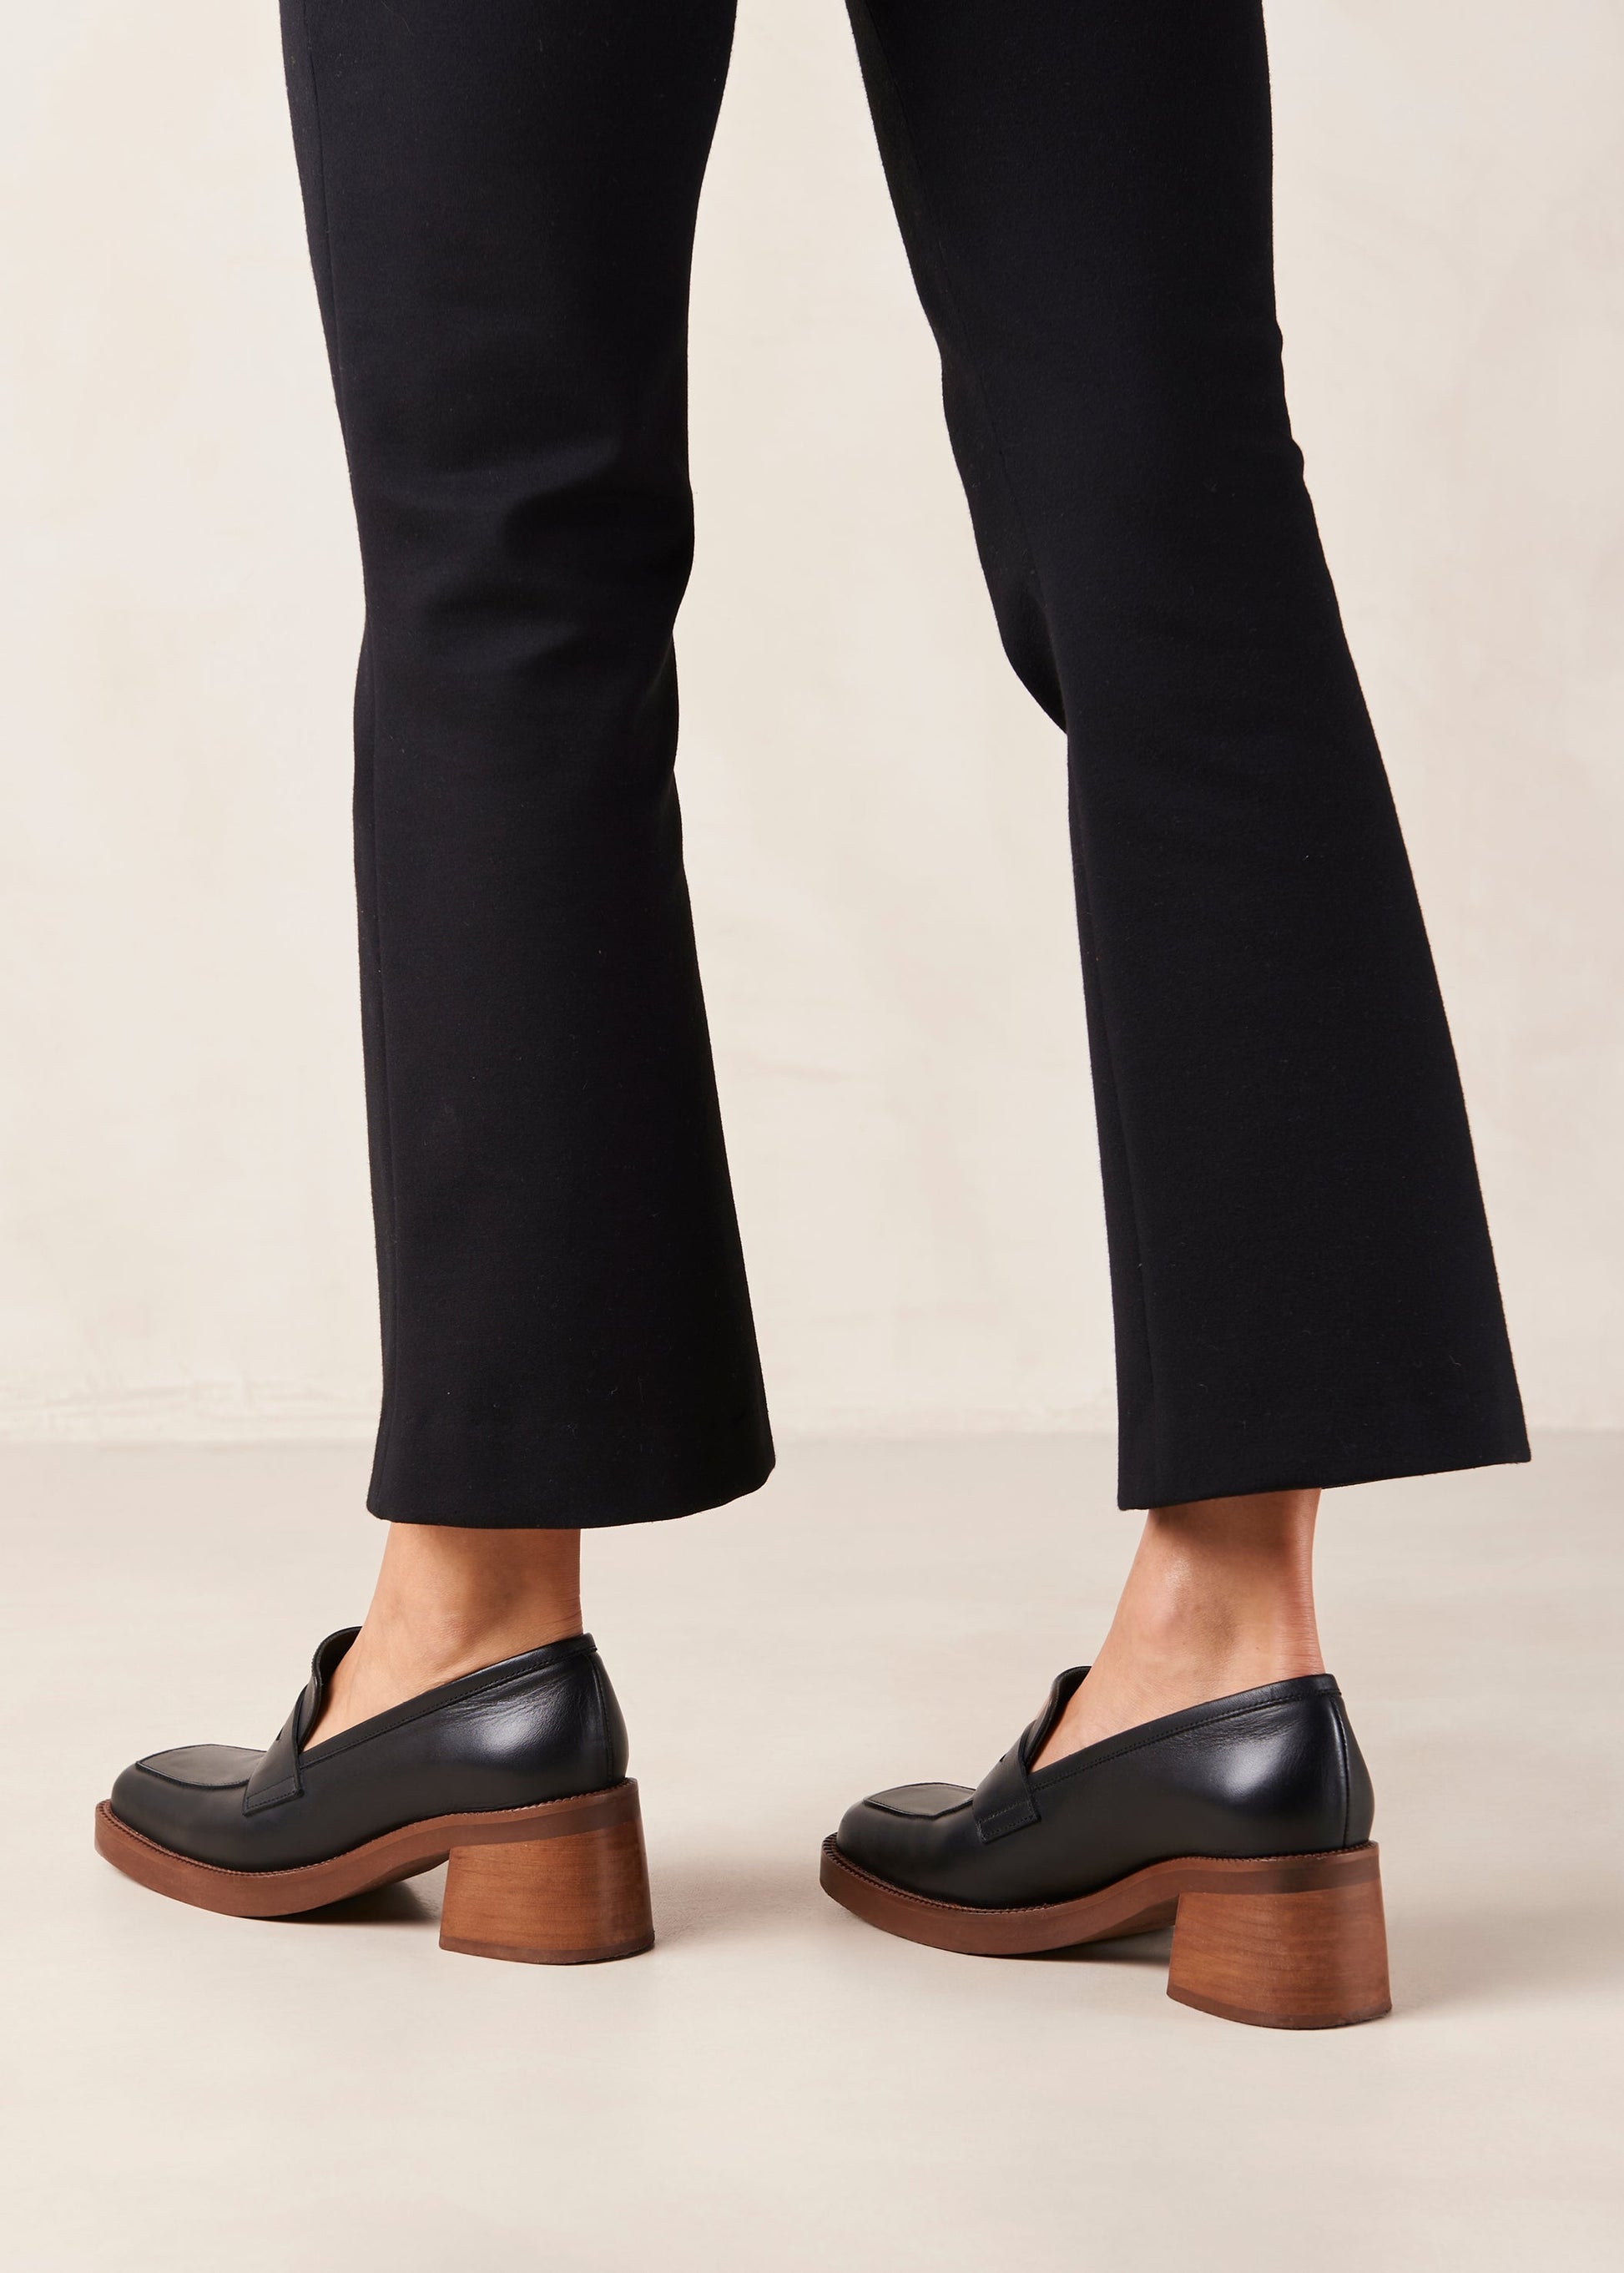 If you are always game for extra height, Roxanne is the loafer-pump hybrid you have been craving for. Think your evergreen moccasin silhouette set atop a chunky block heel for a little flattering elevation. They come in premium black leather and feature the classic penny tab across the vamp. Sustainably made in Spain. Alohas Roxanne Black Leather Loafer.